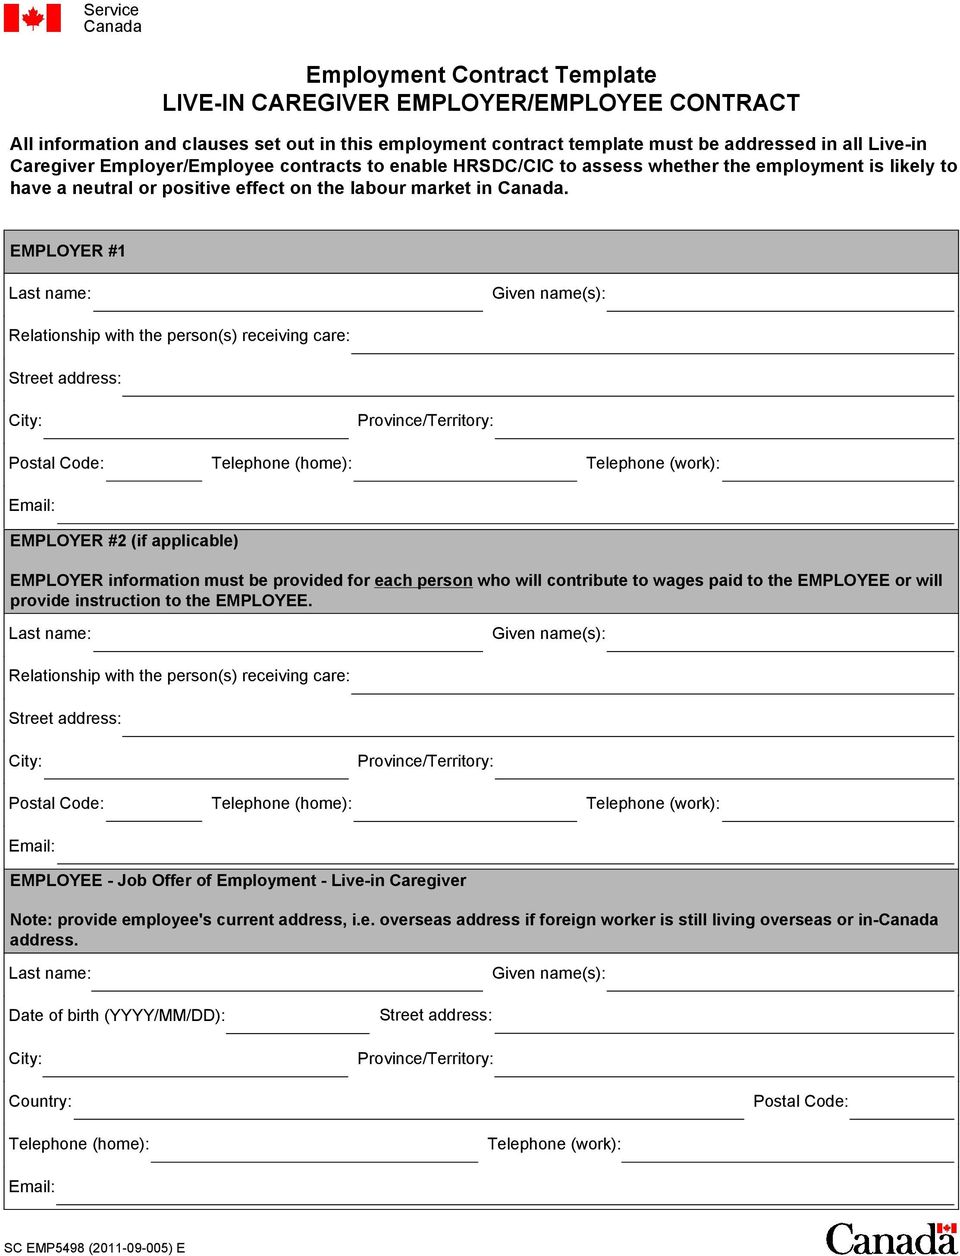 Employment Contract Template LIVE-IN CAREGIVER EMPLOYER/EMPLOYEE With cpa hire agreement template